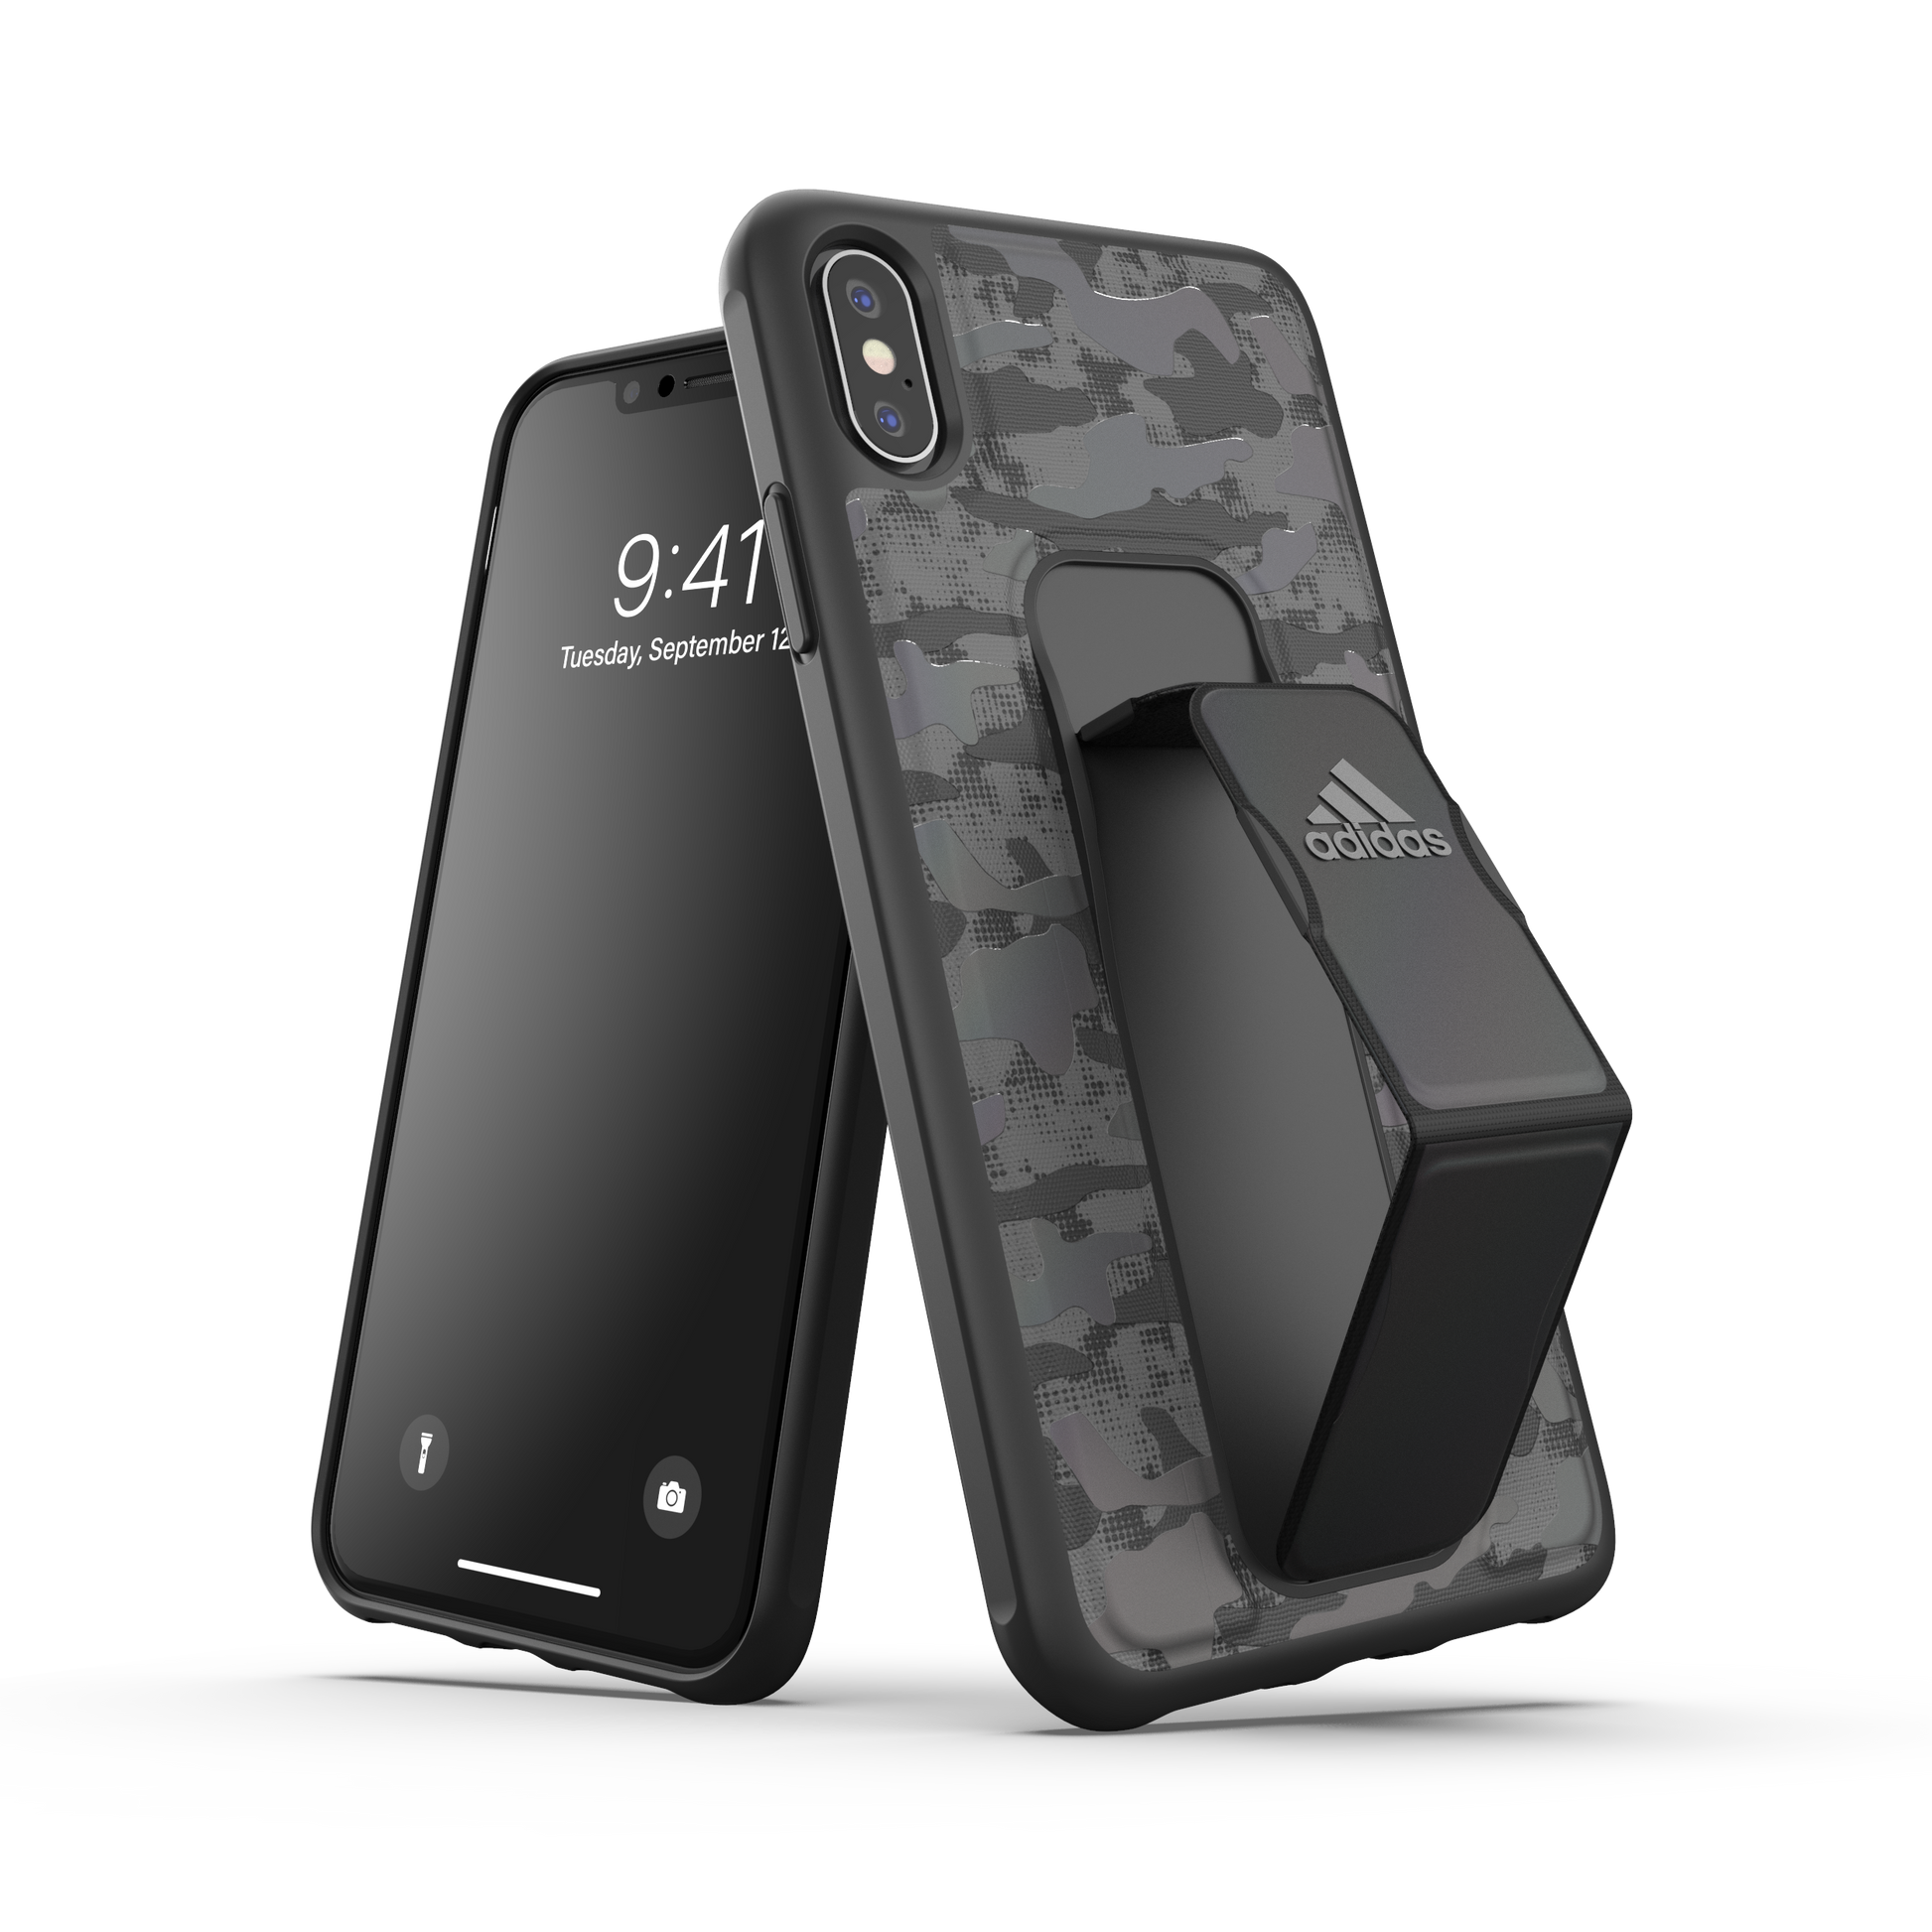 Buy Grip Case Camouflage Black iPhone Cover